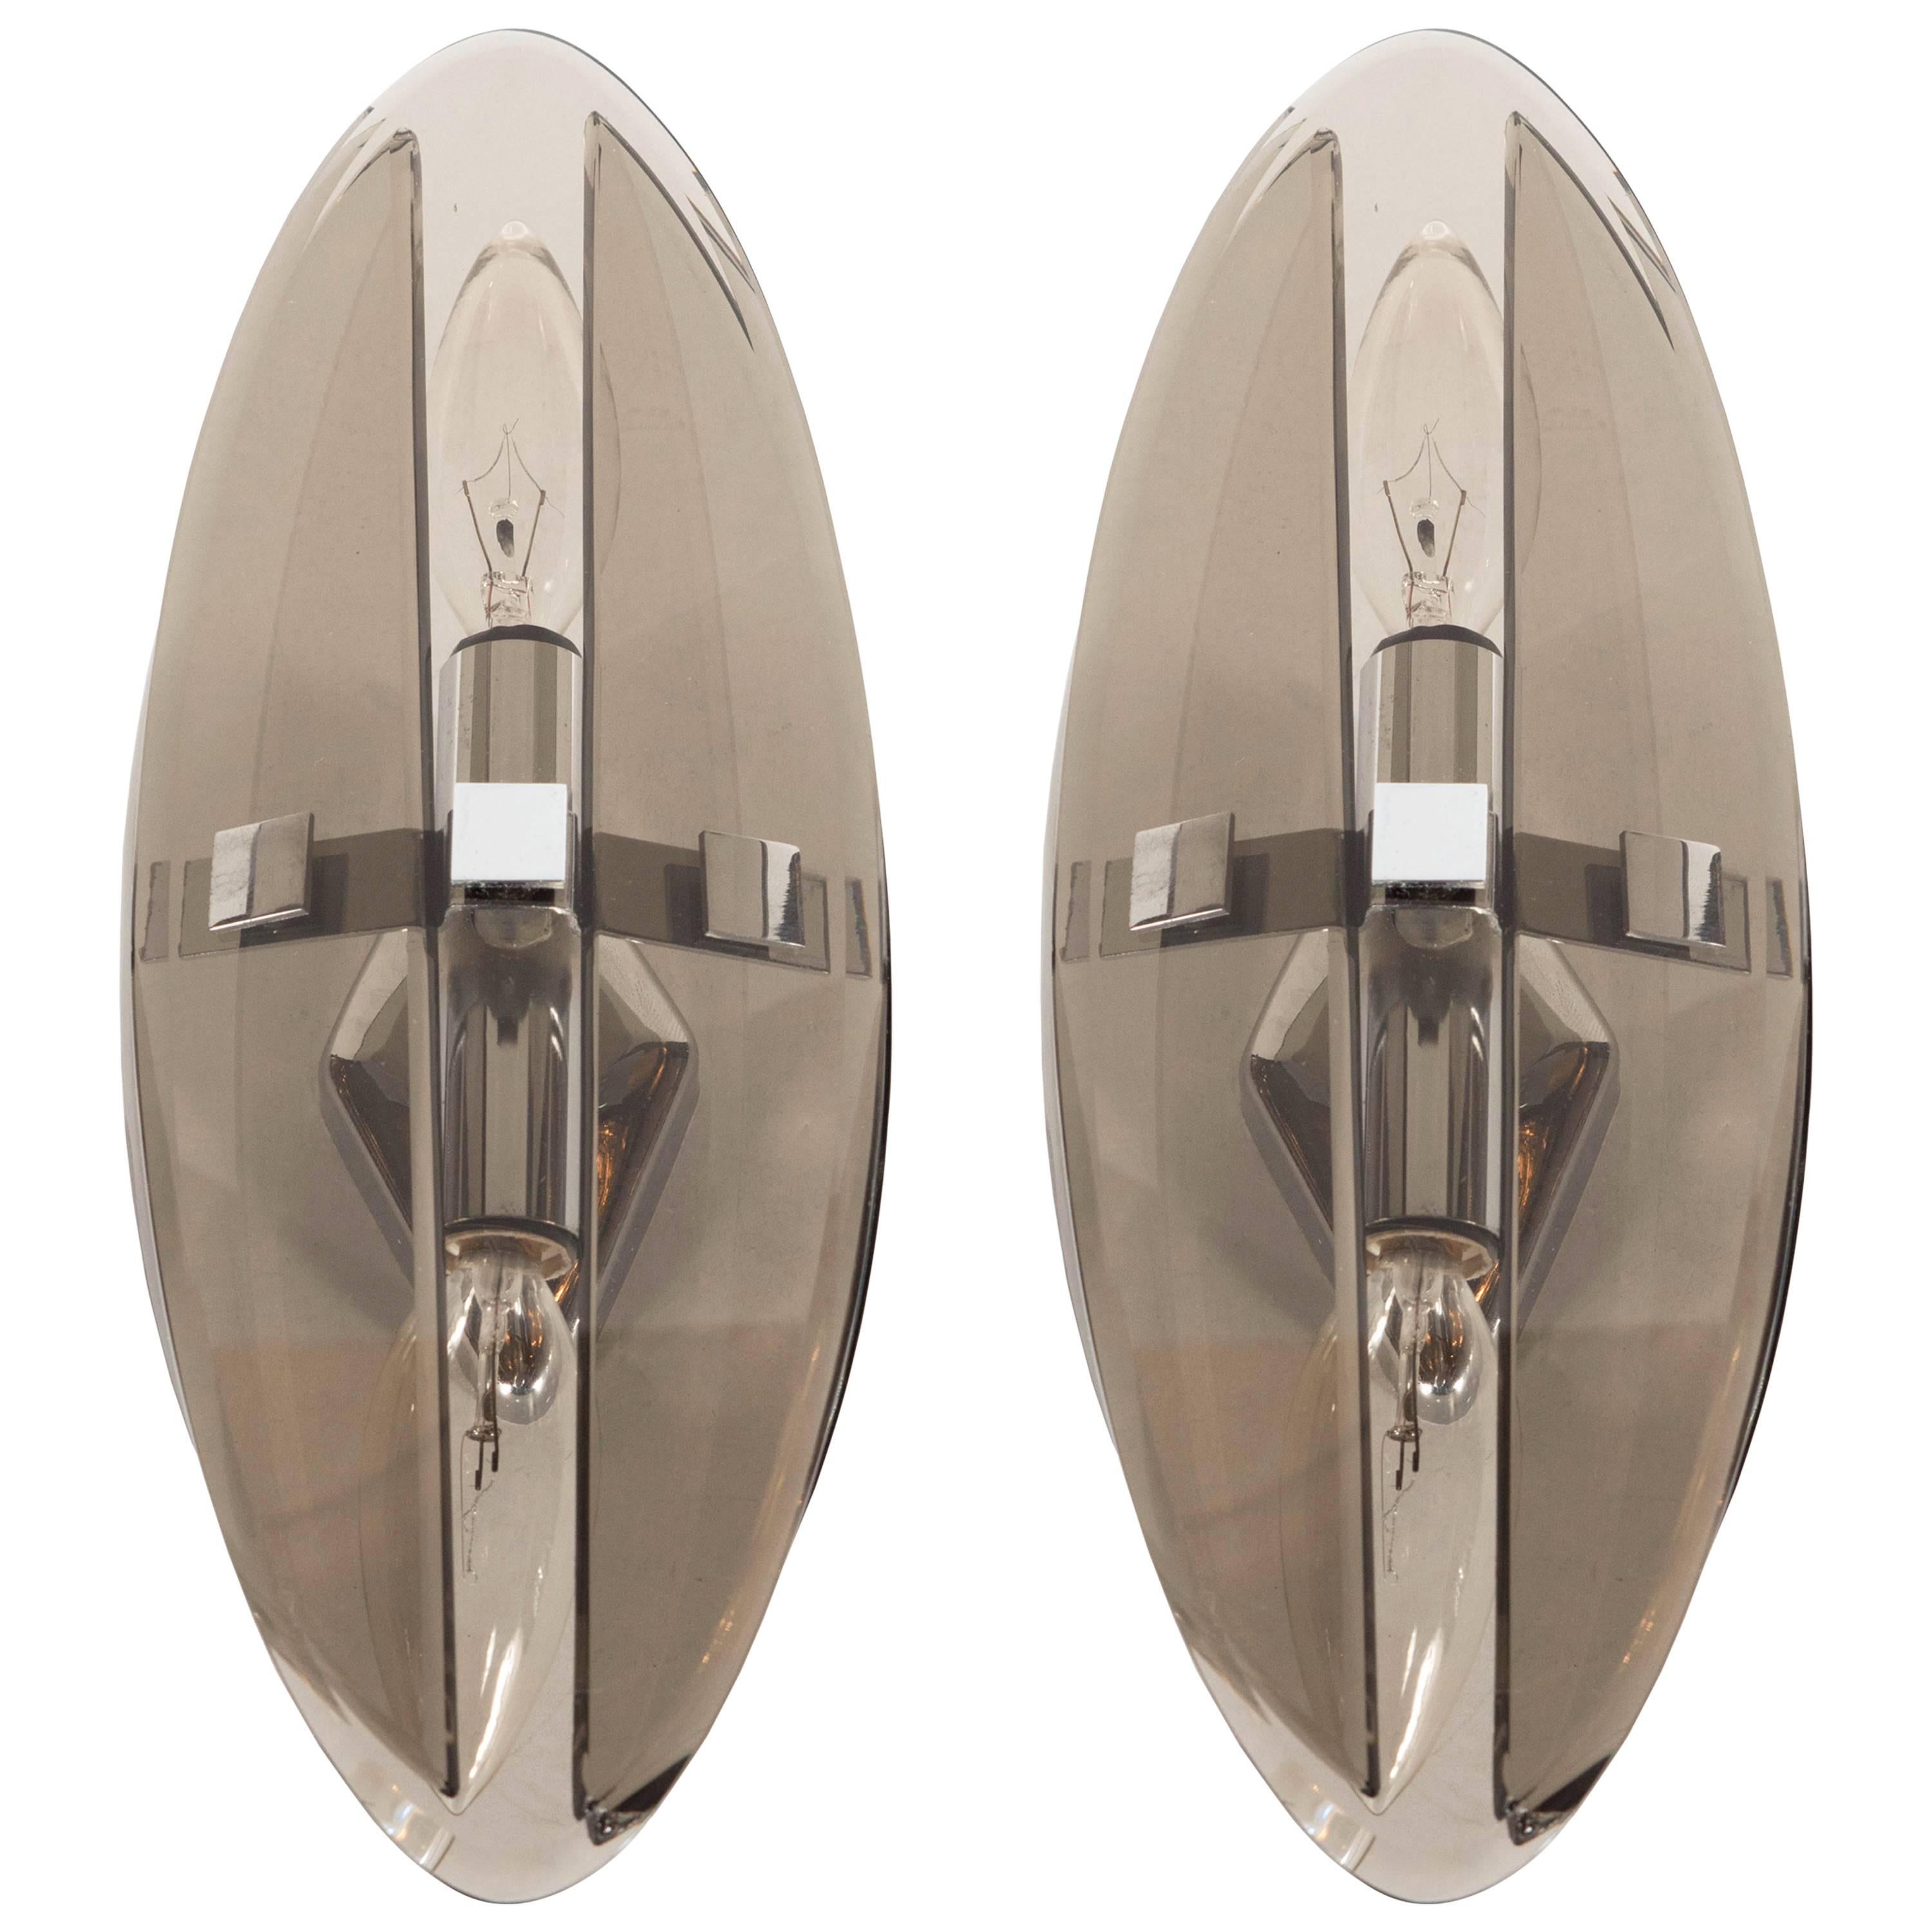 Pair of Mid-Century Modernist Smoked Glass Elliptical Sconces by Veca